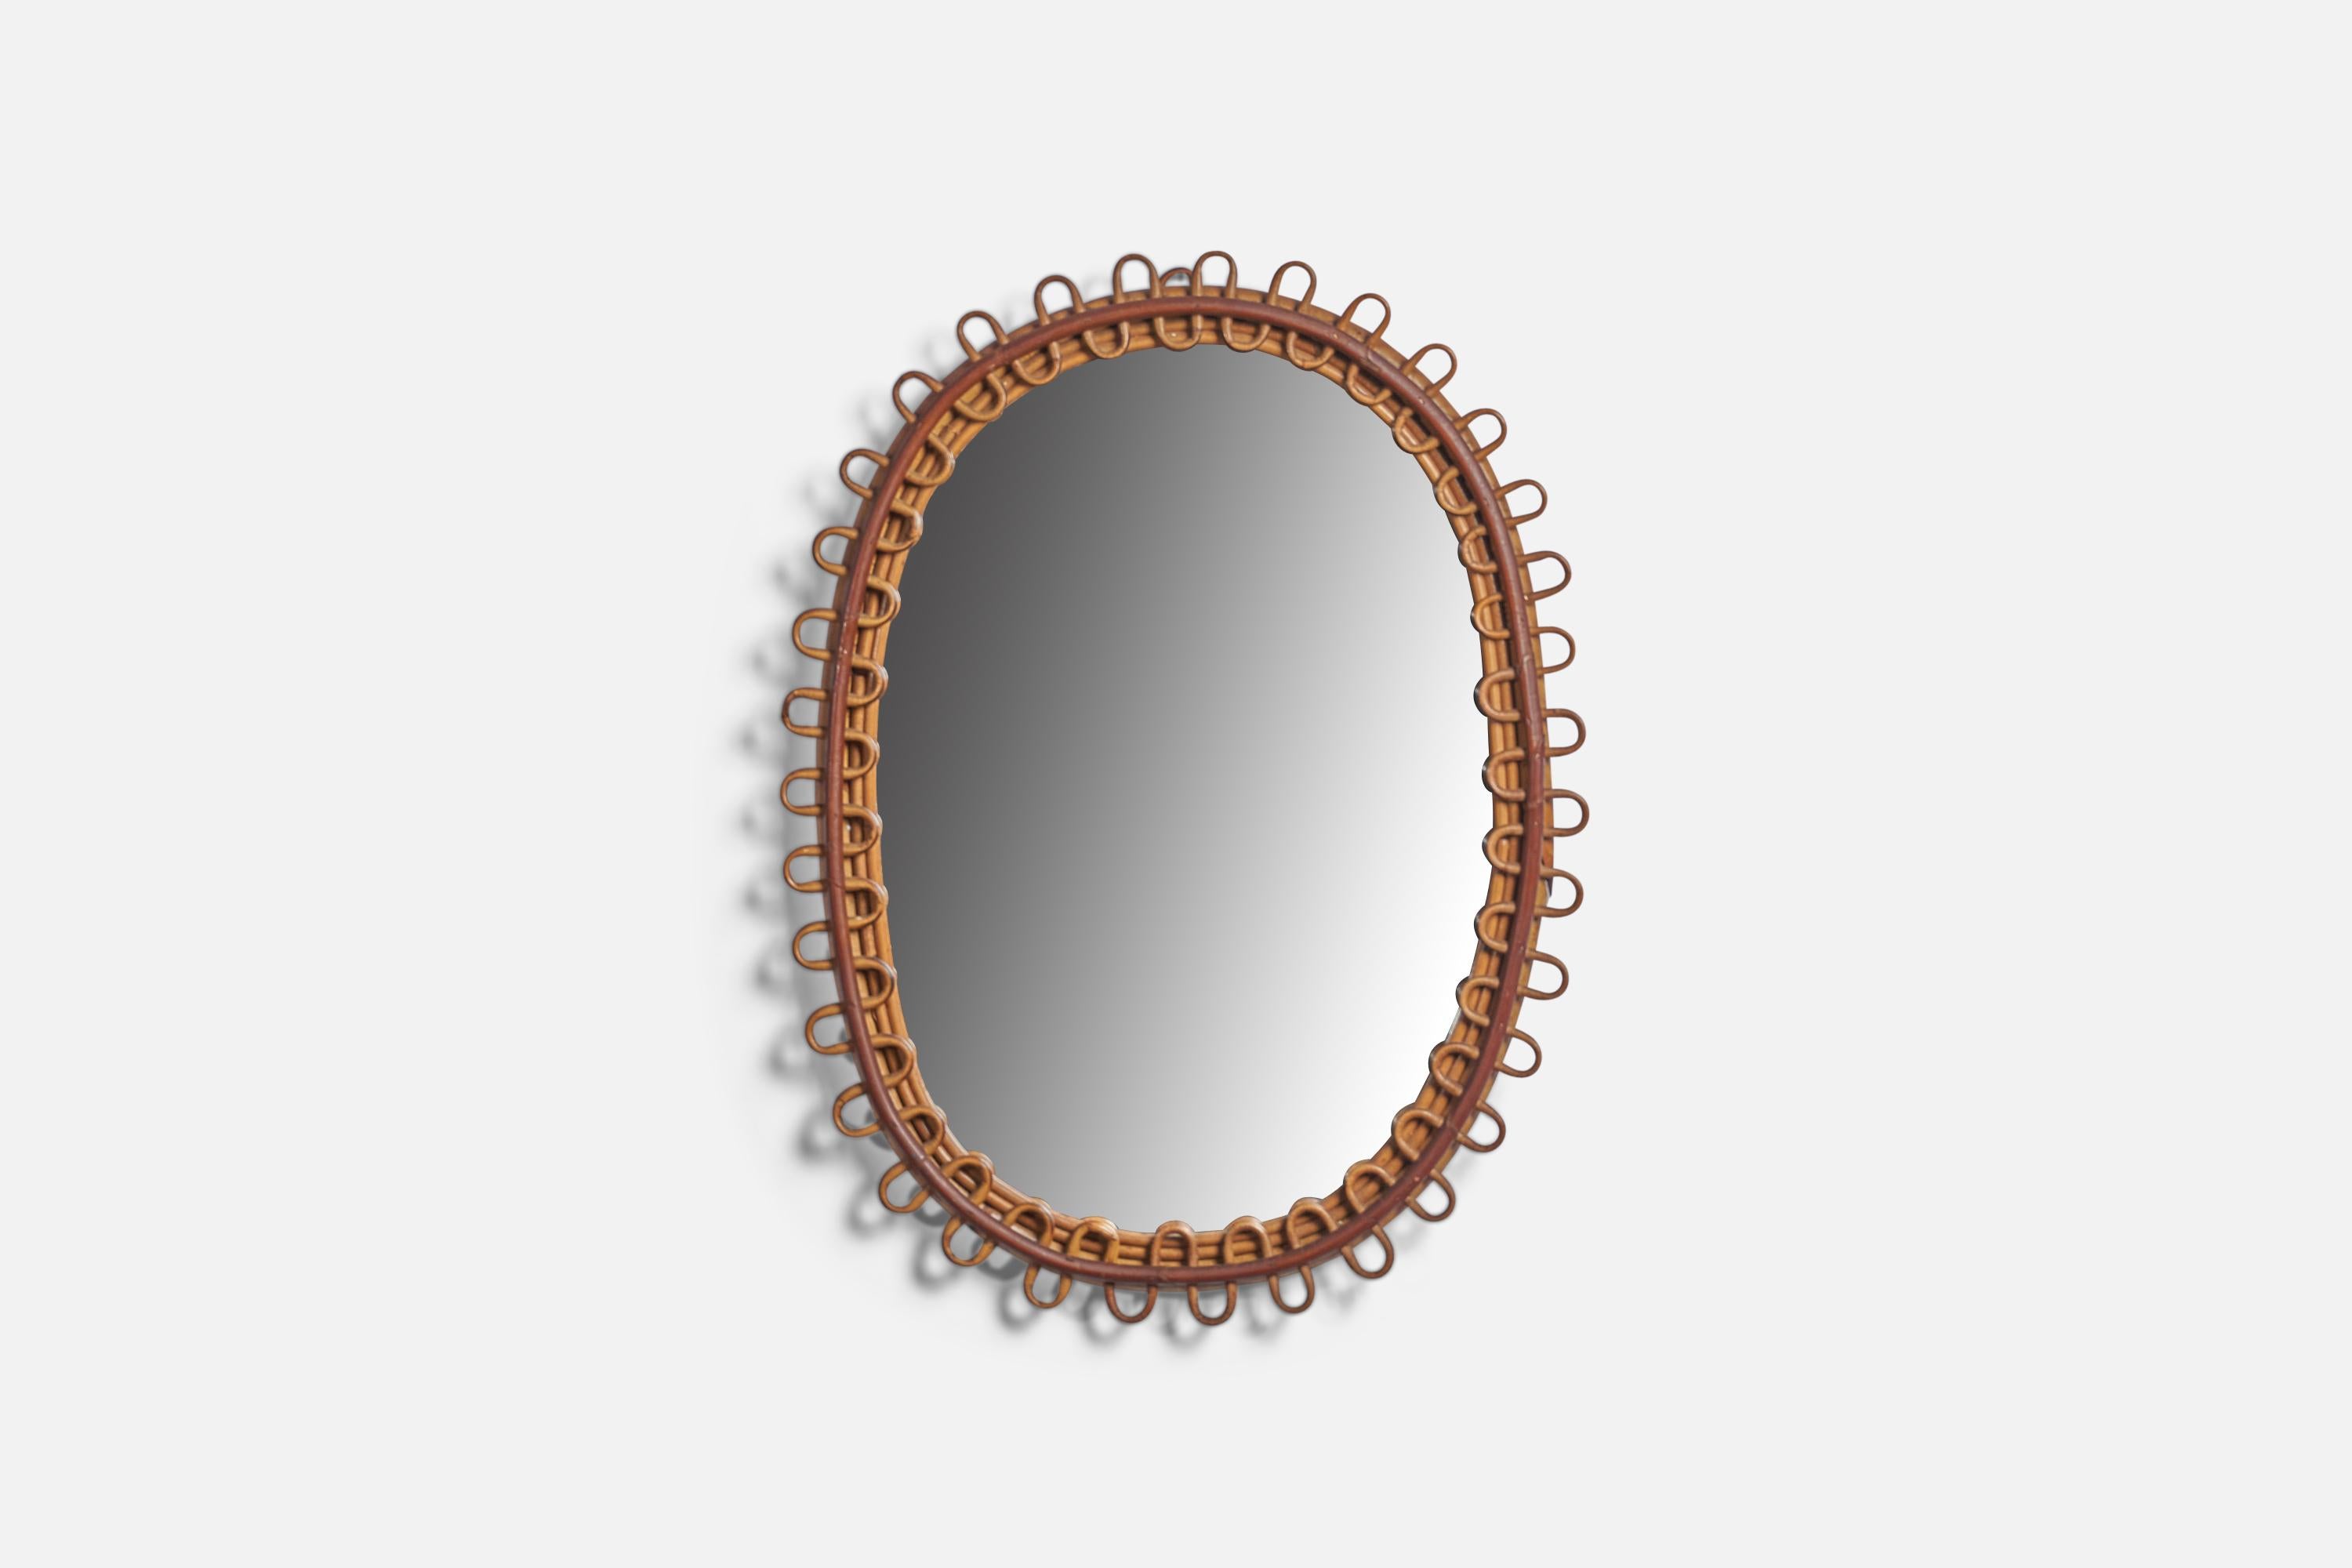 An oval bamboo and rattan mirror, designed and produced in Italy, c. 1950s.